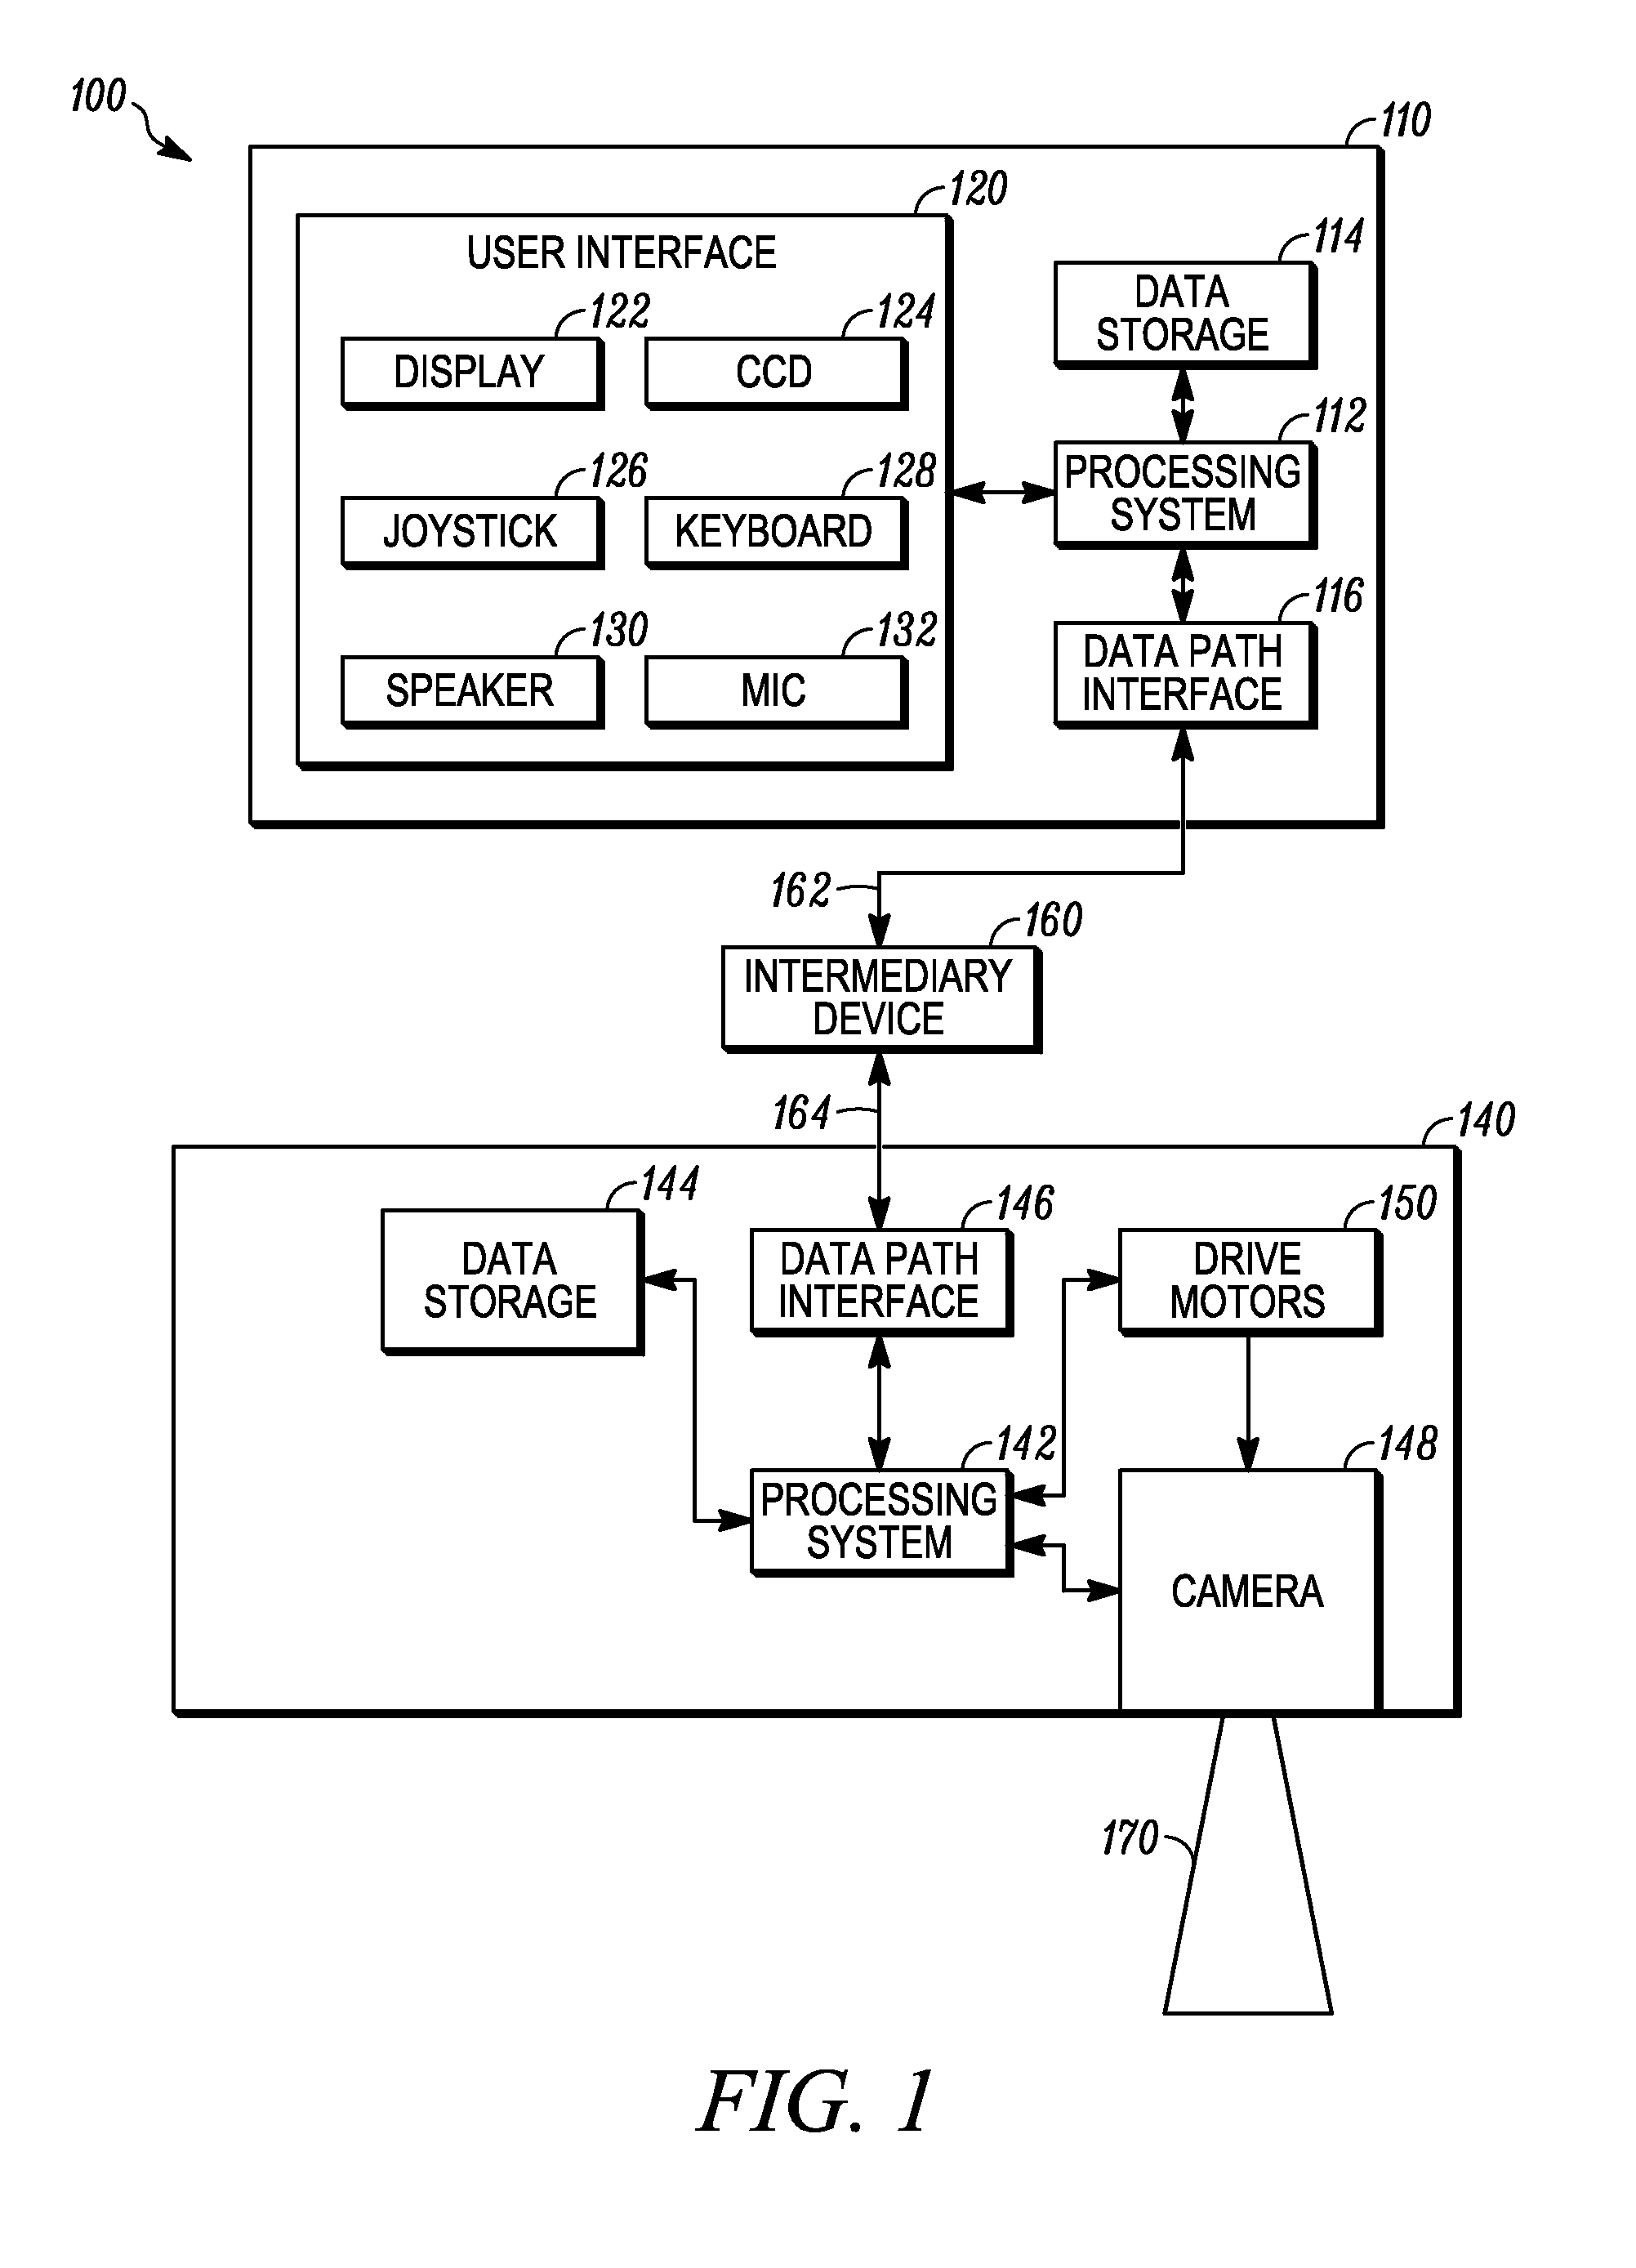 Methods and apparatus to compensate for overshoot of a desired field of vision by a remotely-controlled image capture device